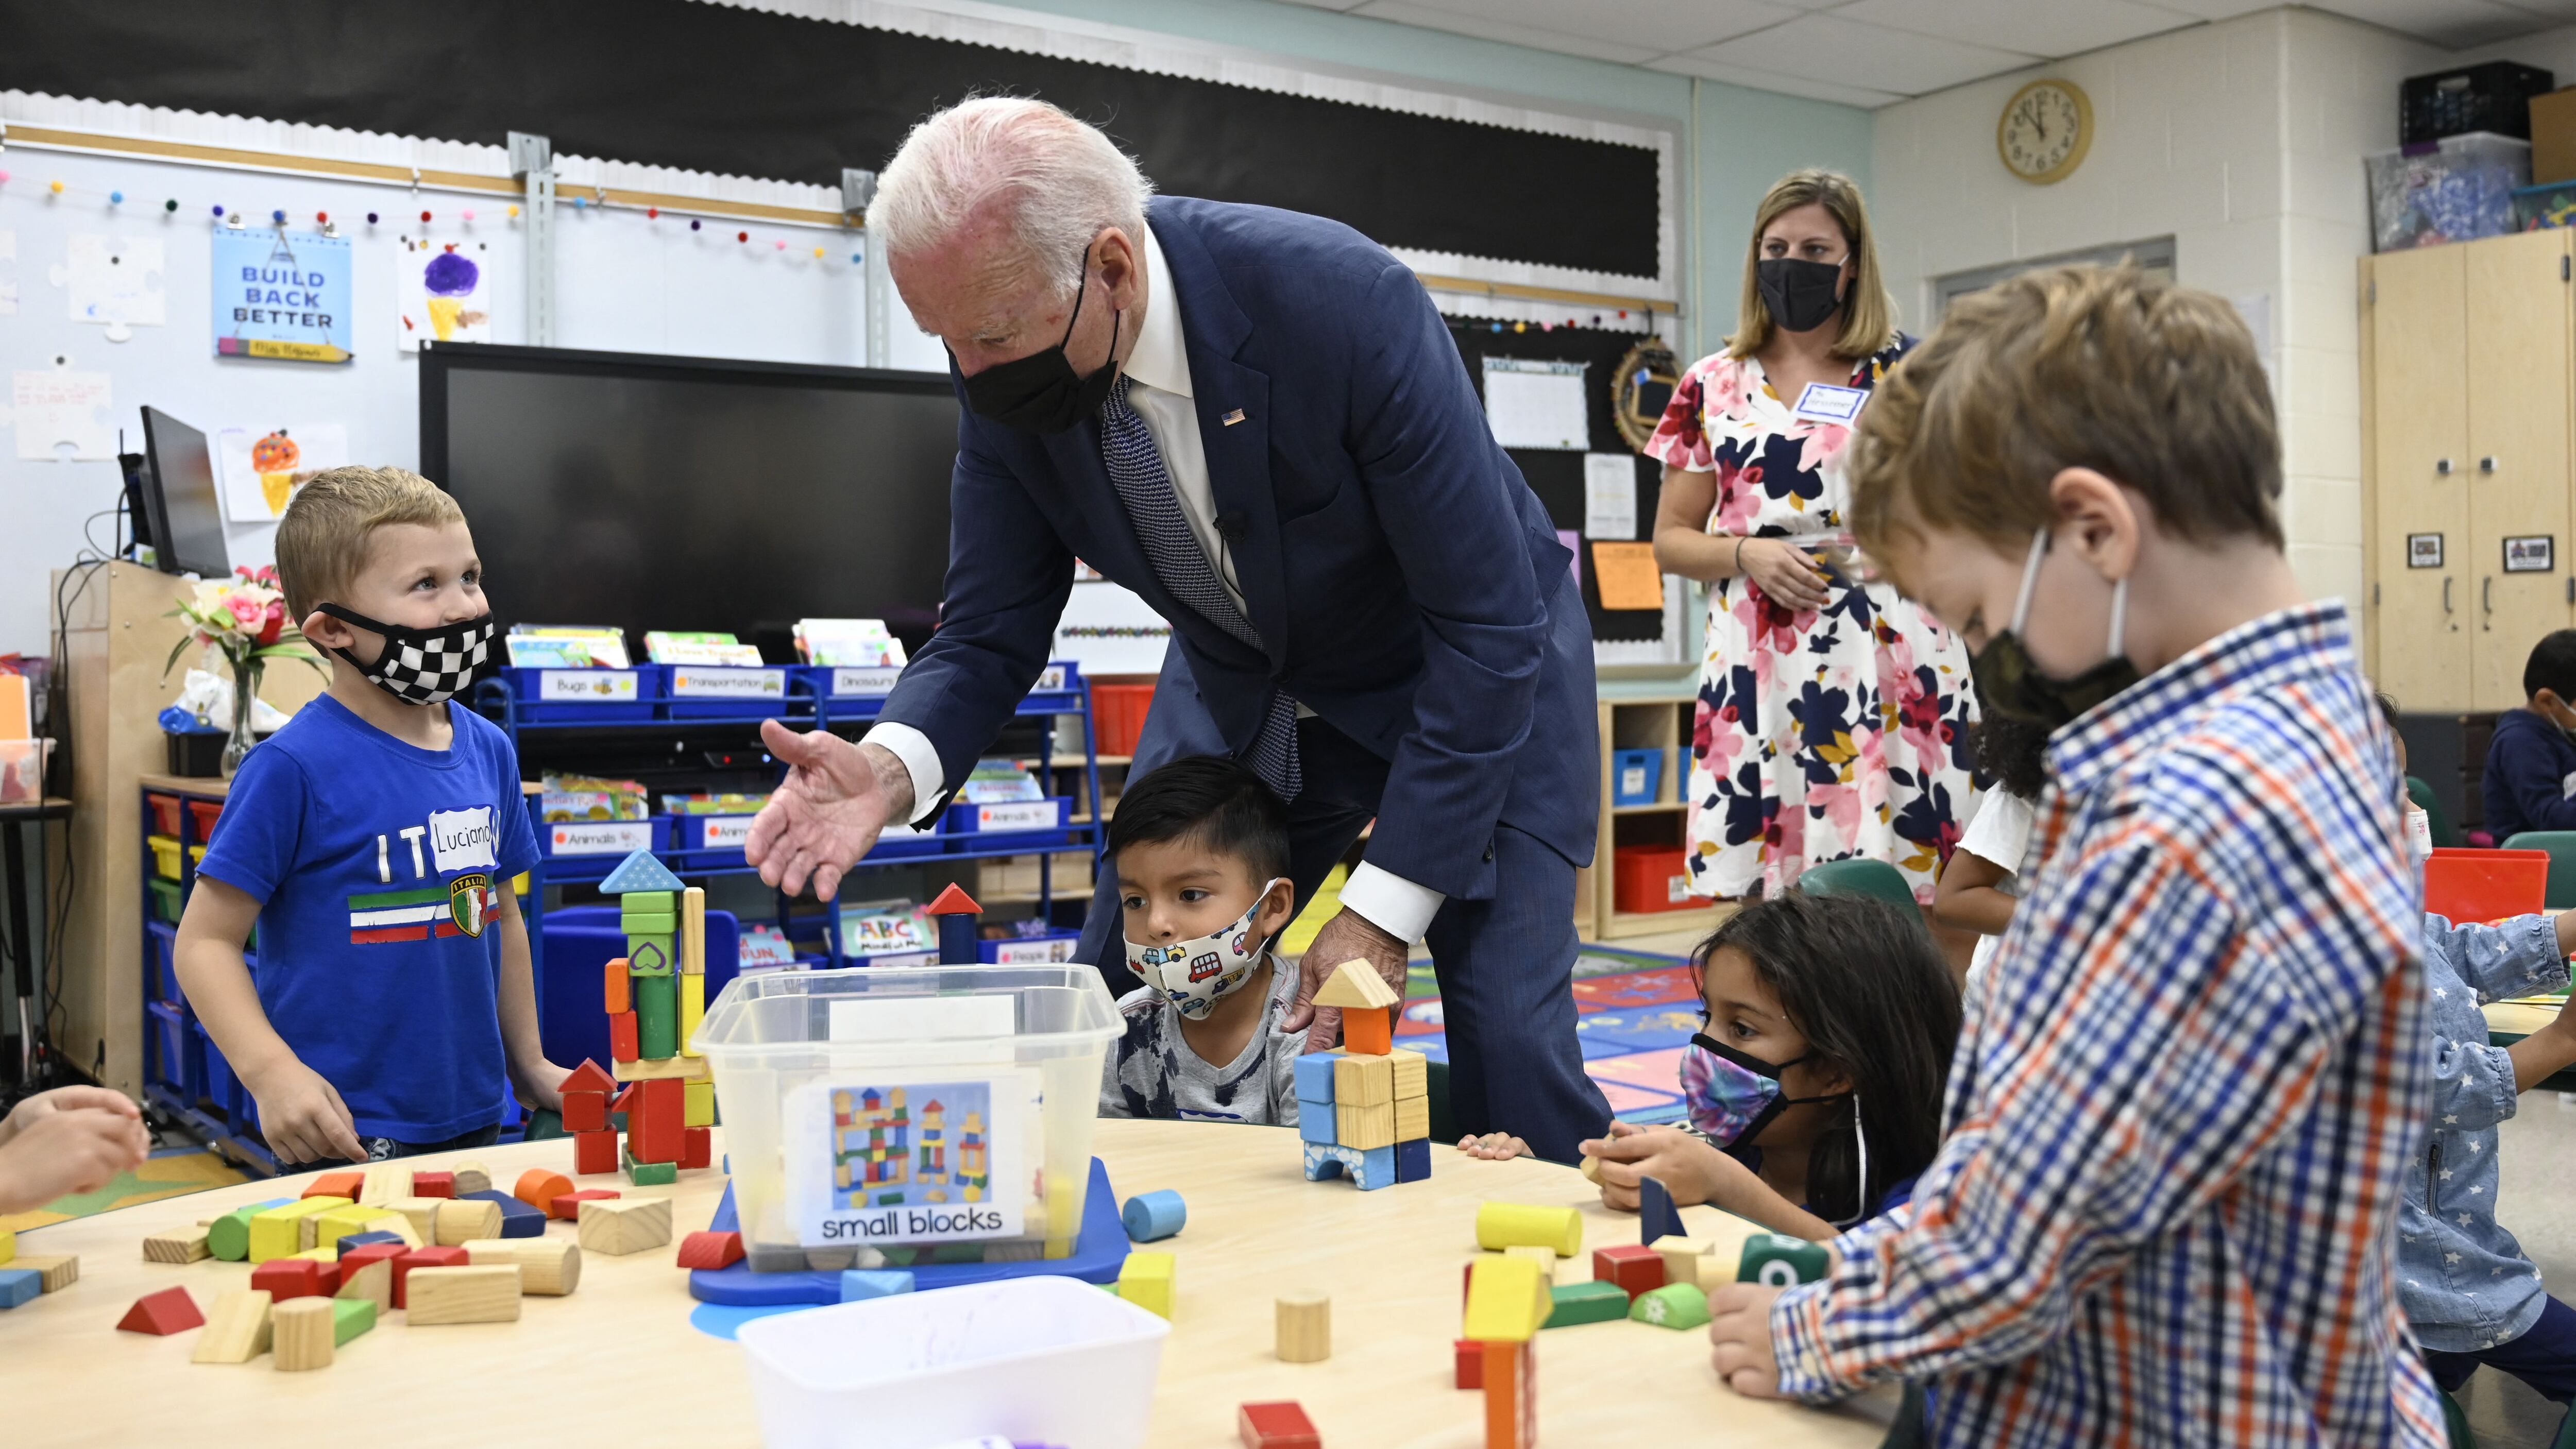 President Joe Biden meets with young students during a school visit.